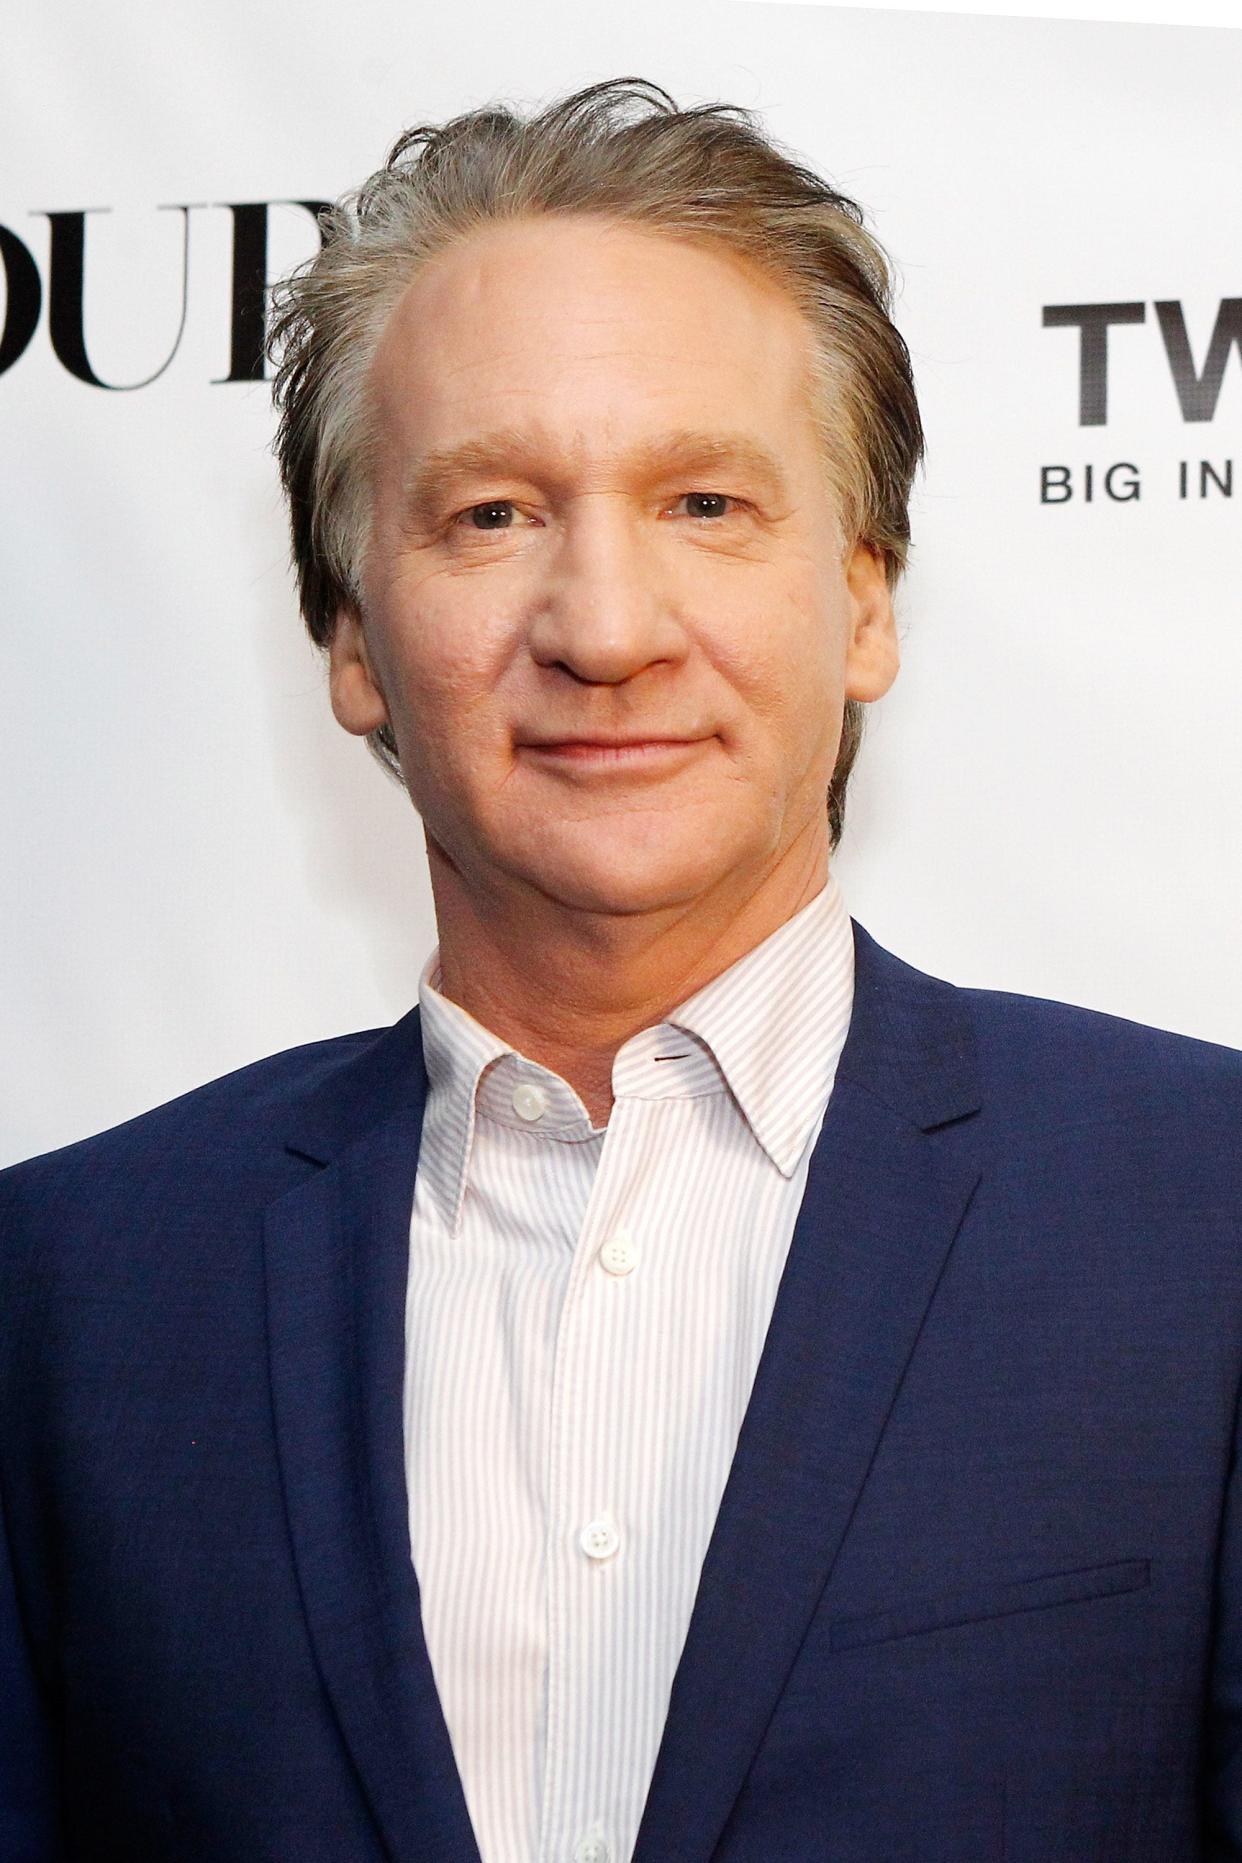 Bill Maher, pictured, opened up in a recent interview about why he refuses to publish an interview he did with Kanye West on his "Club Random" podcast.